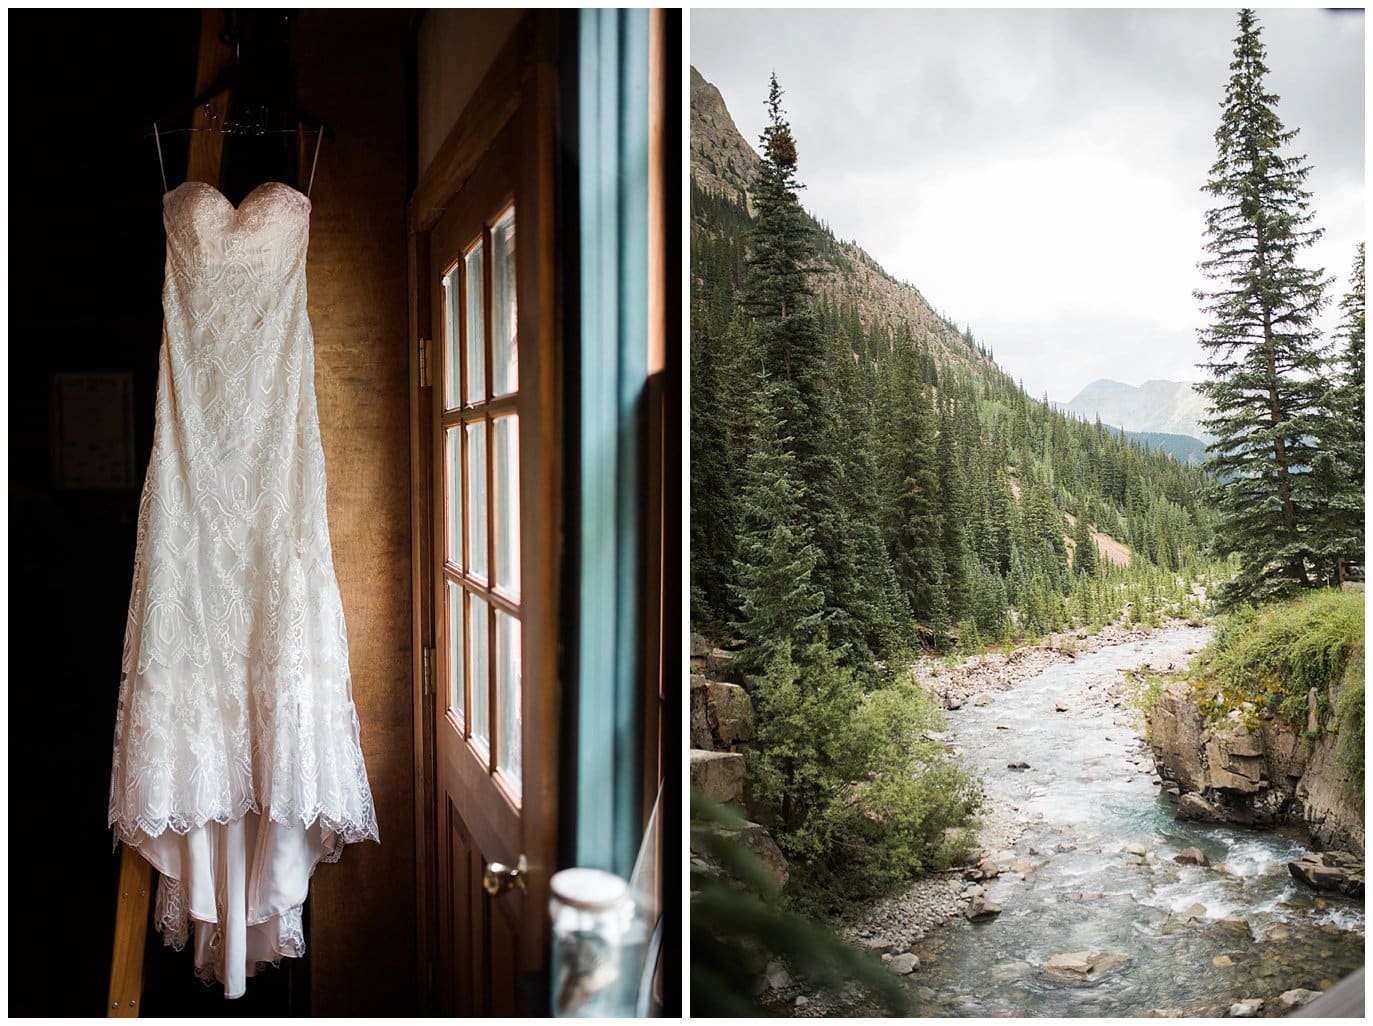 dress in window and river at Eureka Lodge Wedding by Rocky Mountain Wedding Photographer Jennie Crate